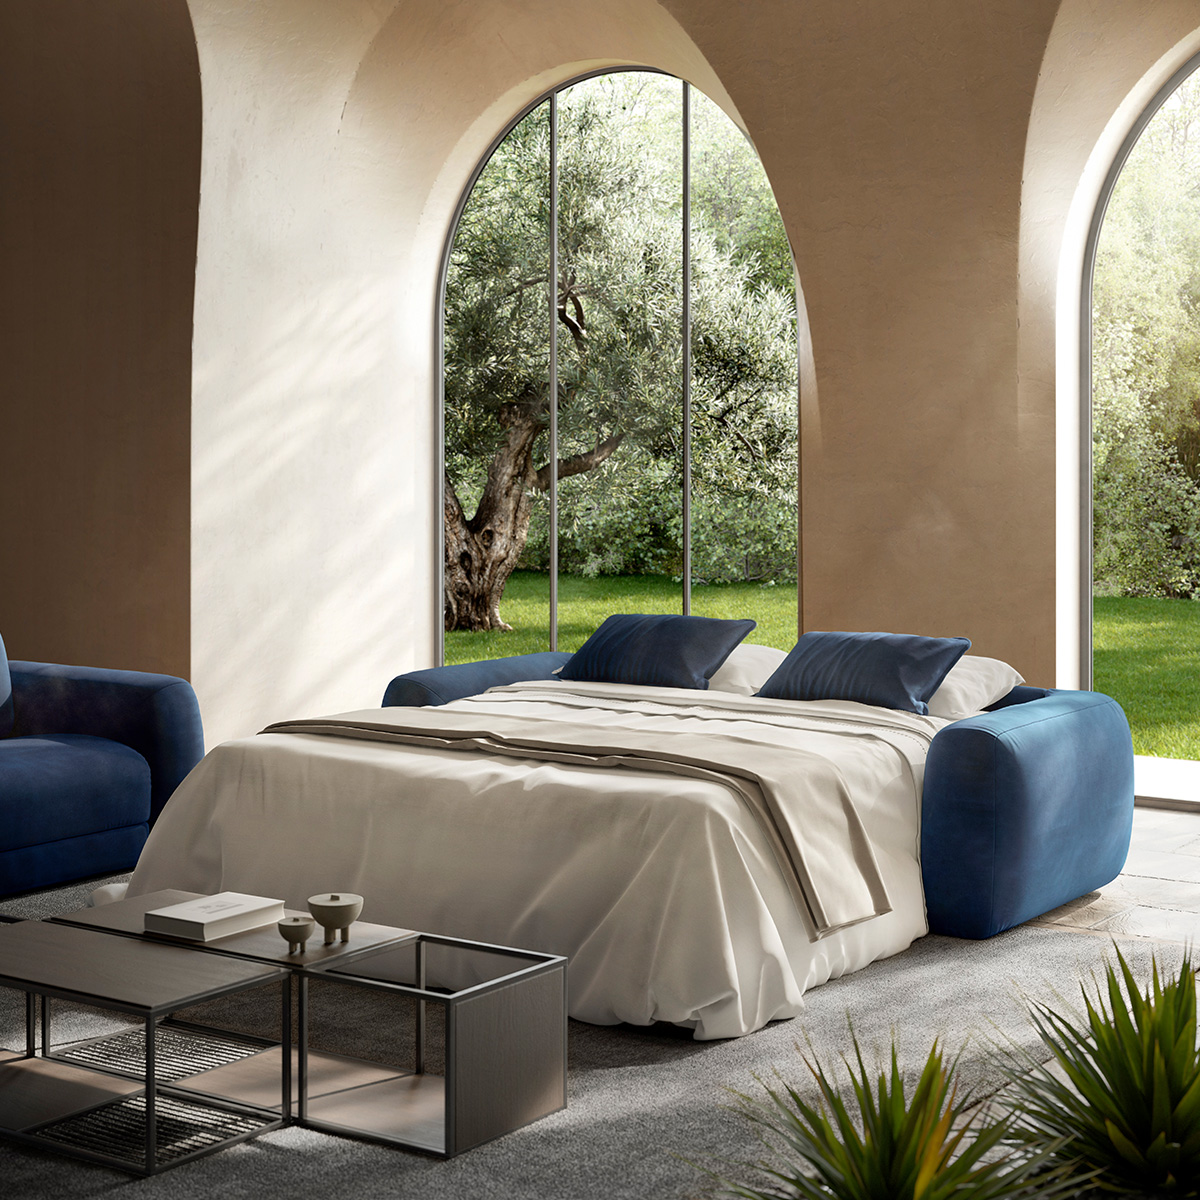 Natuzzi editorial - Mit „Ready-to-Bed“ Mechanismus